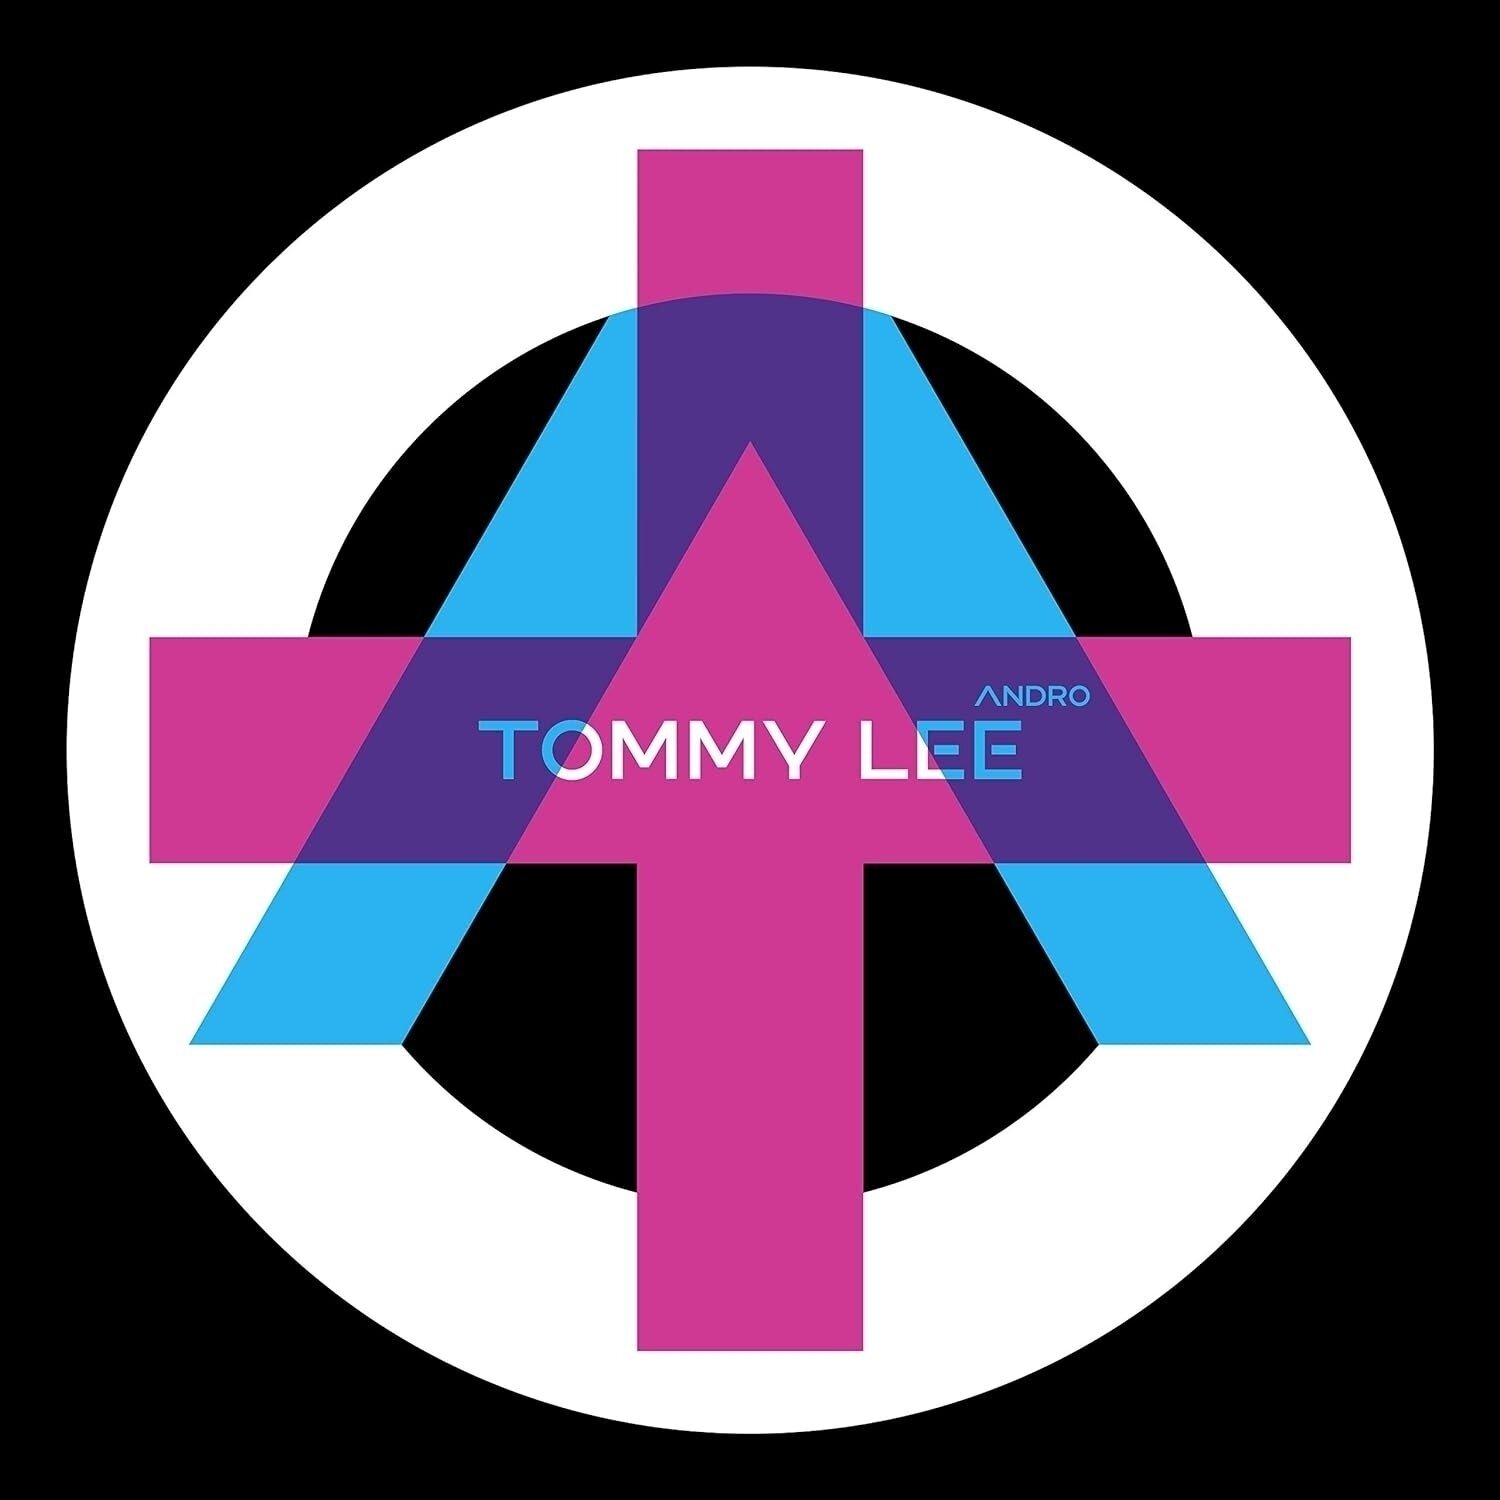 LP Tommy Lee - Andro (Clear w/ Pink & Blue Splatter Coloured) (LP)